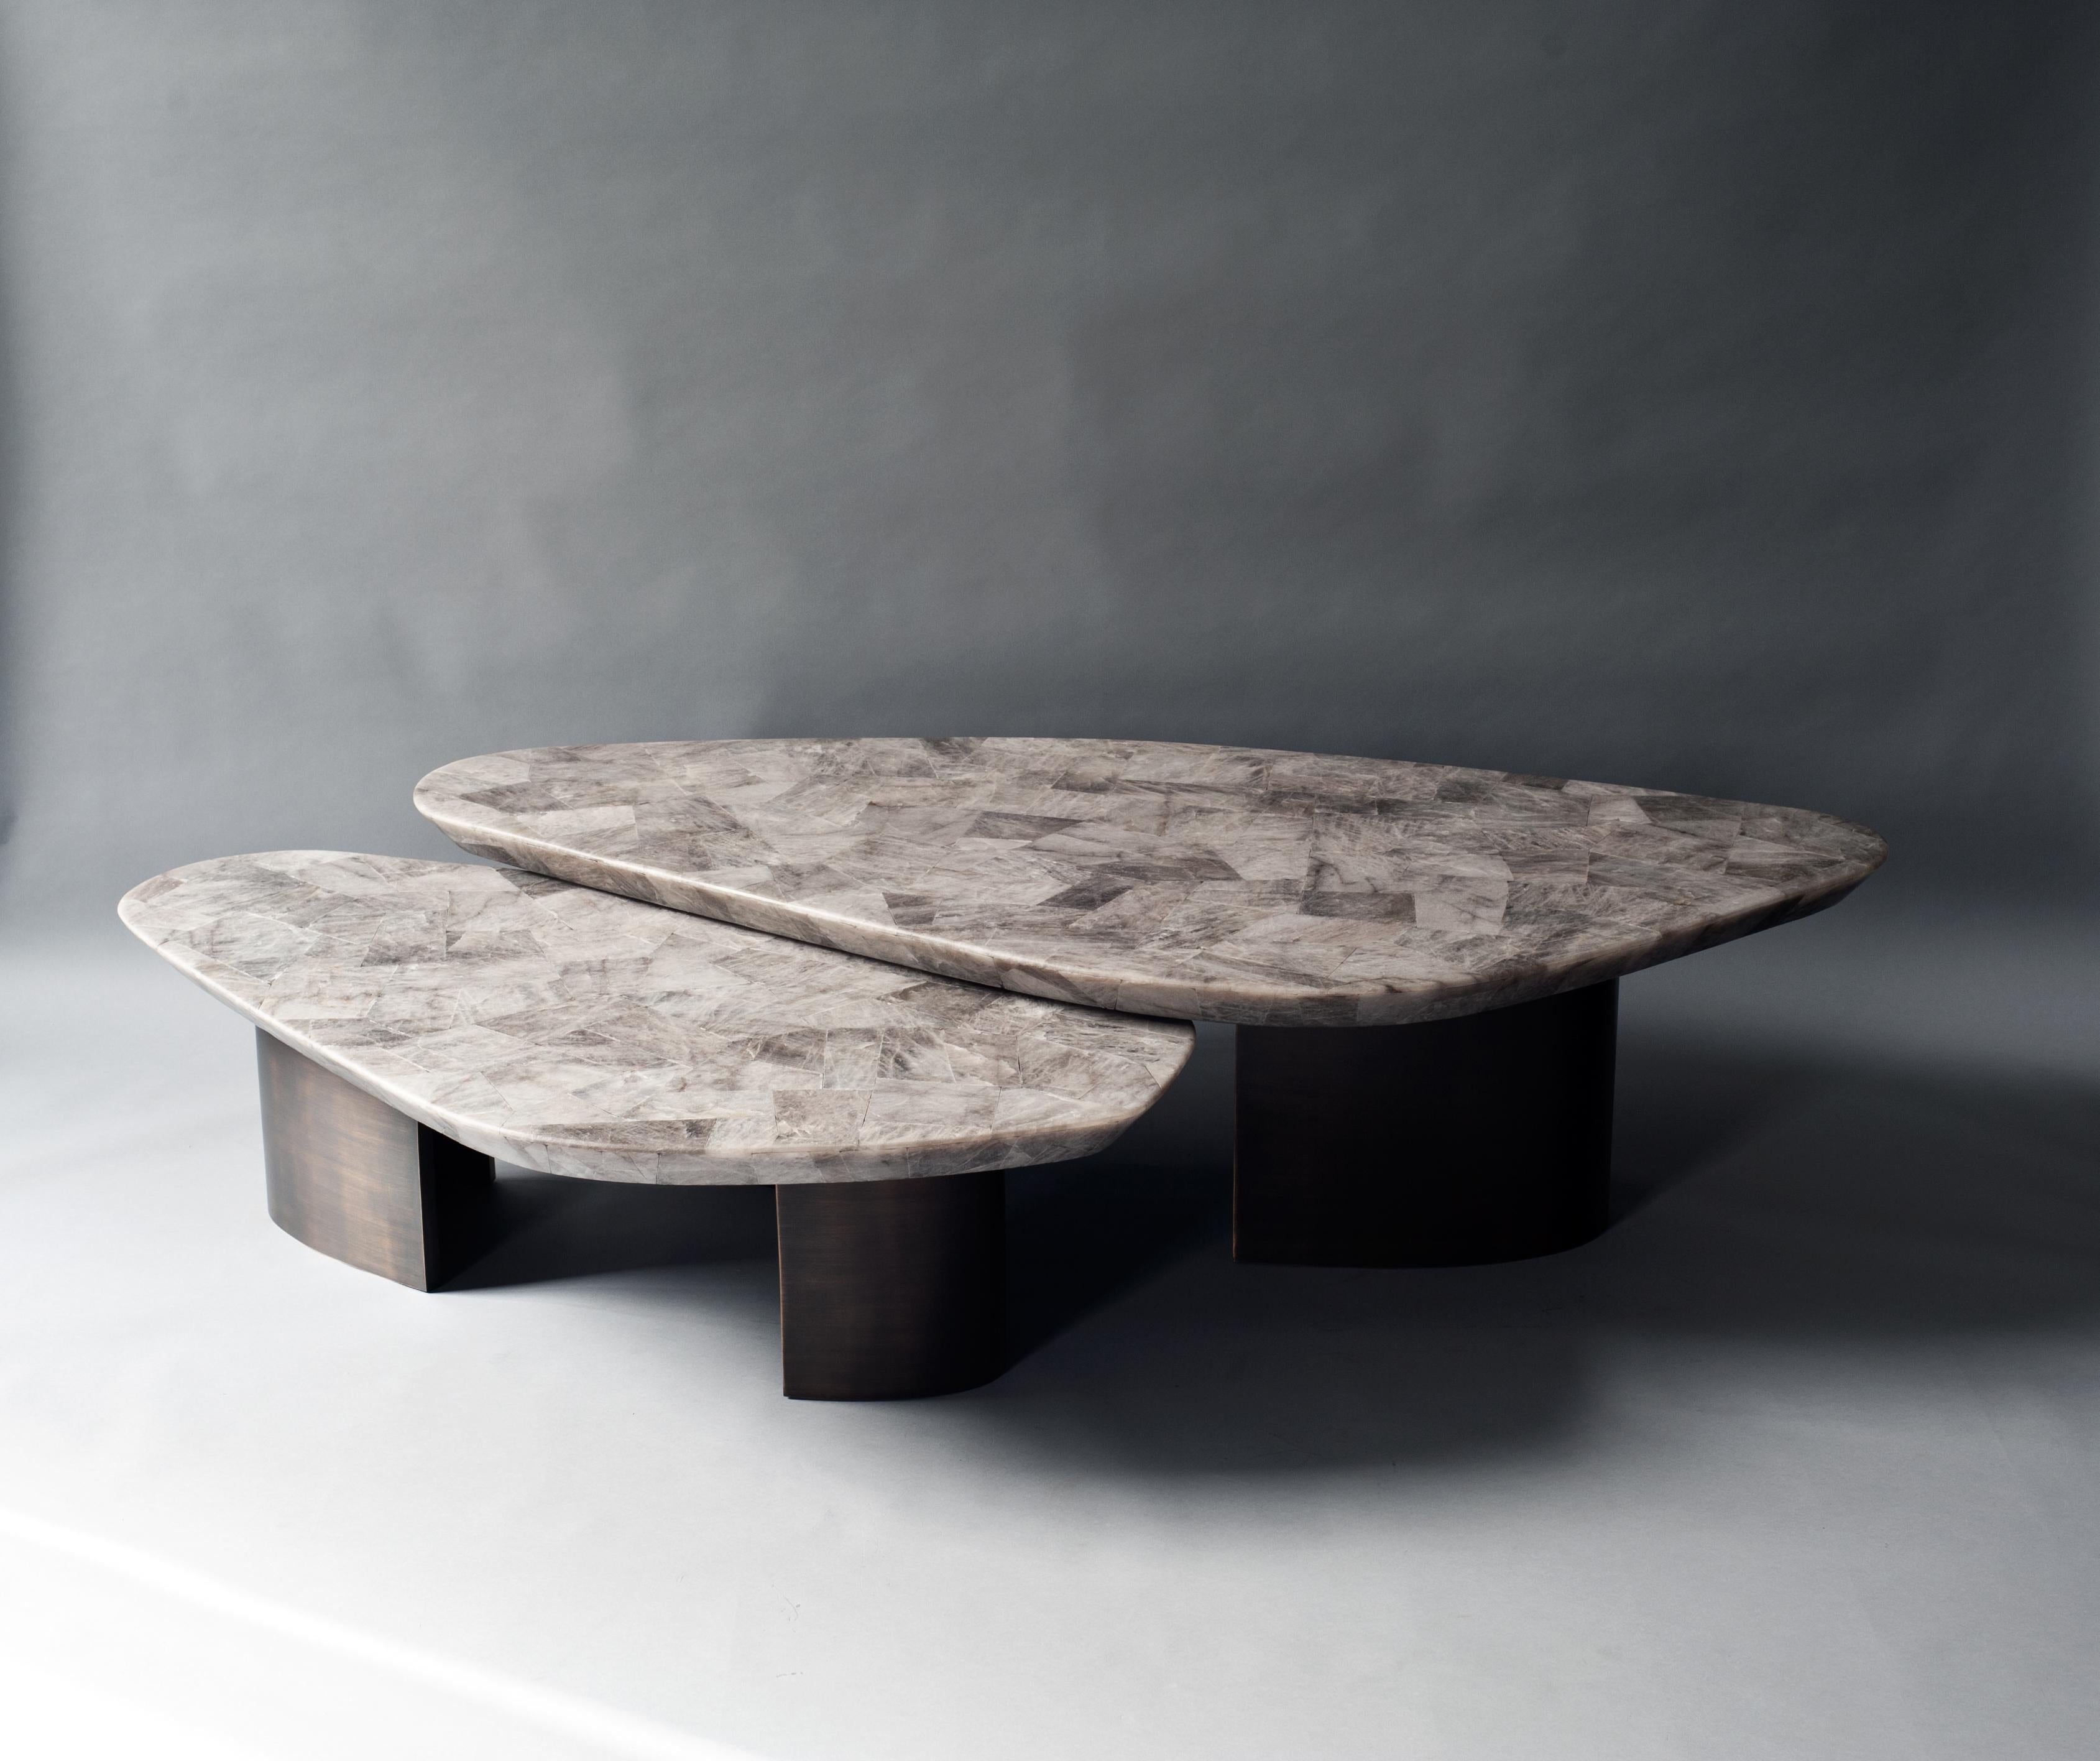 Set of 2 ledge coffee table by DeMuro Das
Dimensions: W 162.2 x D 80.7 x H 39.4 cm
W 126.6 x D 68 x H 32.9 cm
Materials: Quartz (Smokey) - Leather (Random)
 Solid brass (Antique)

Dimensions and finishes can be customized.

DeMuro Das is an